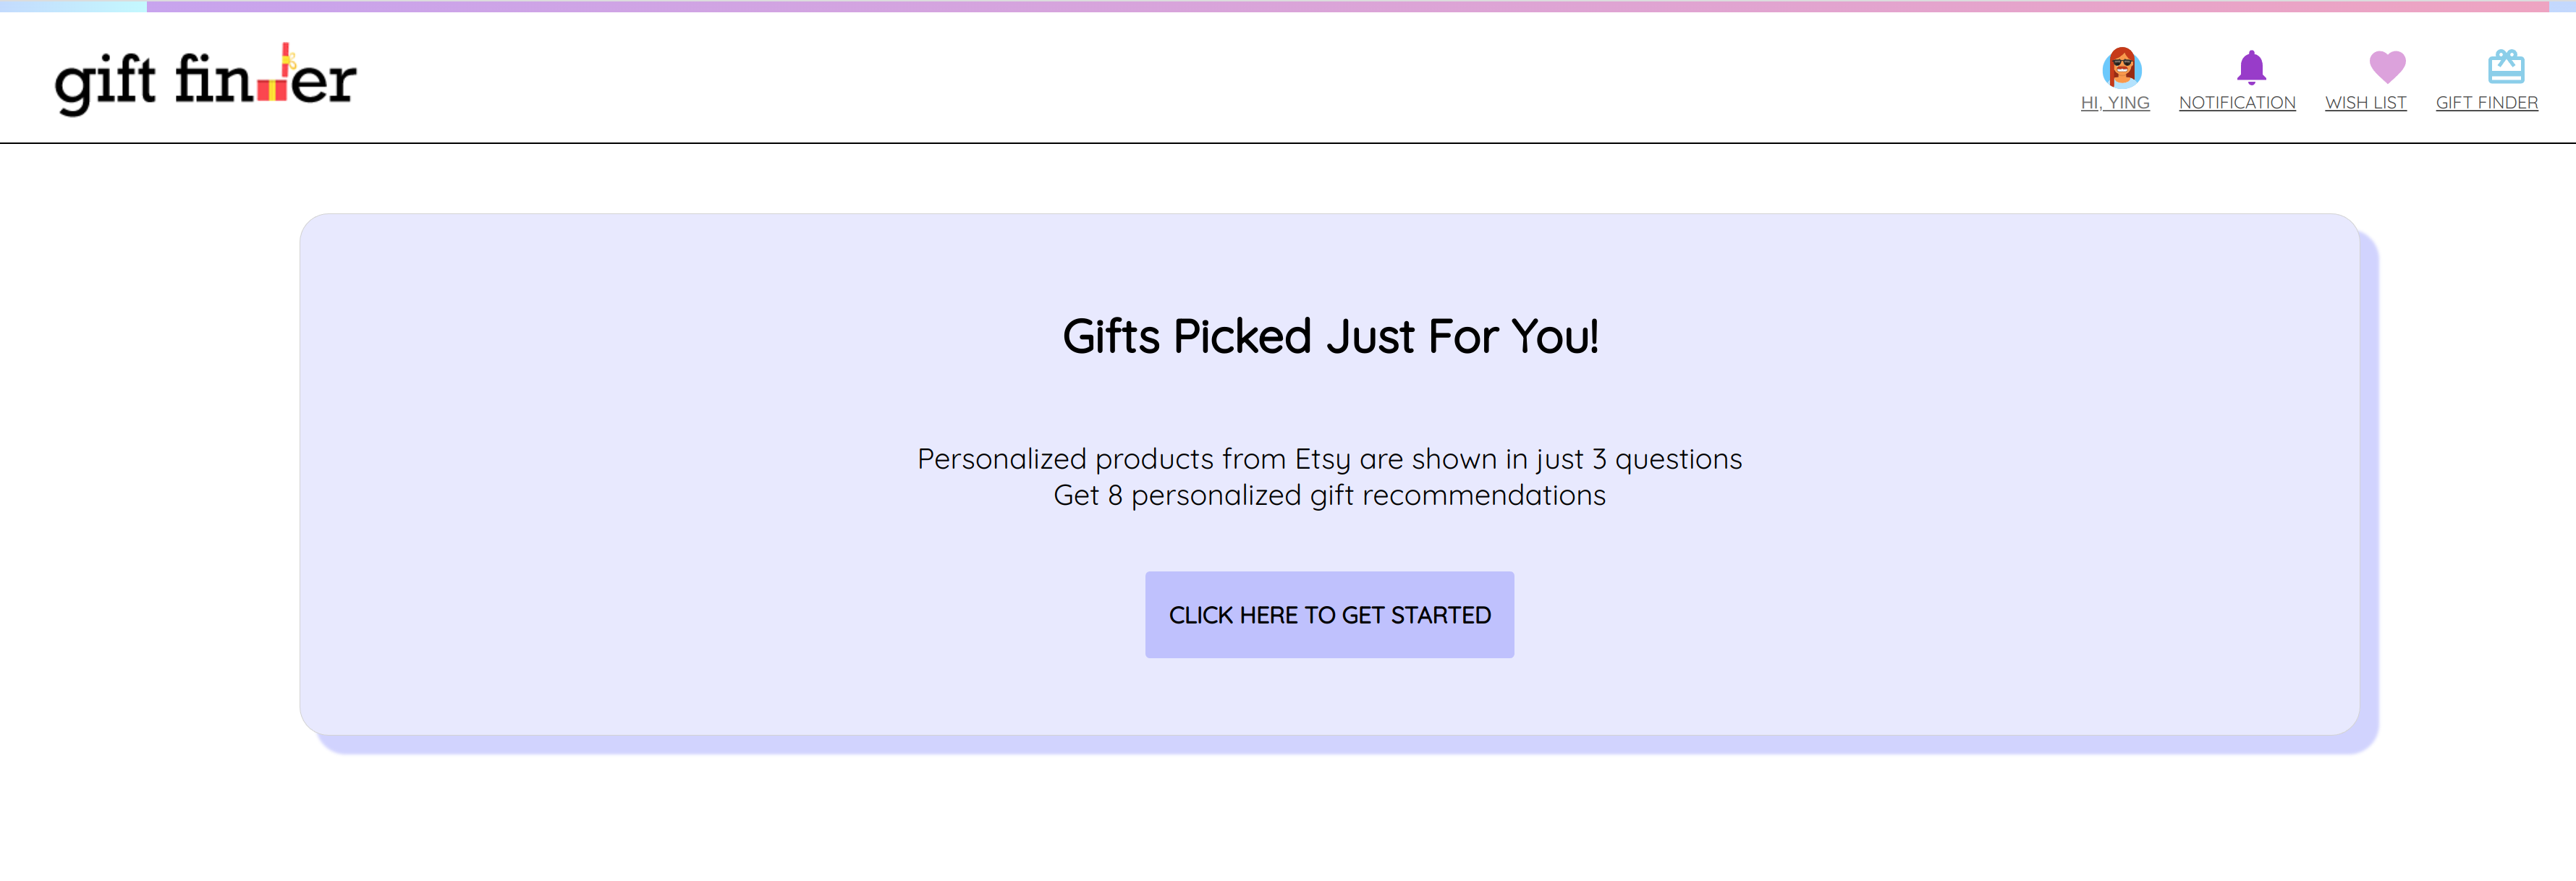 GiftFinder Personalized Questionnaire